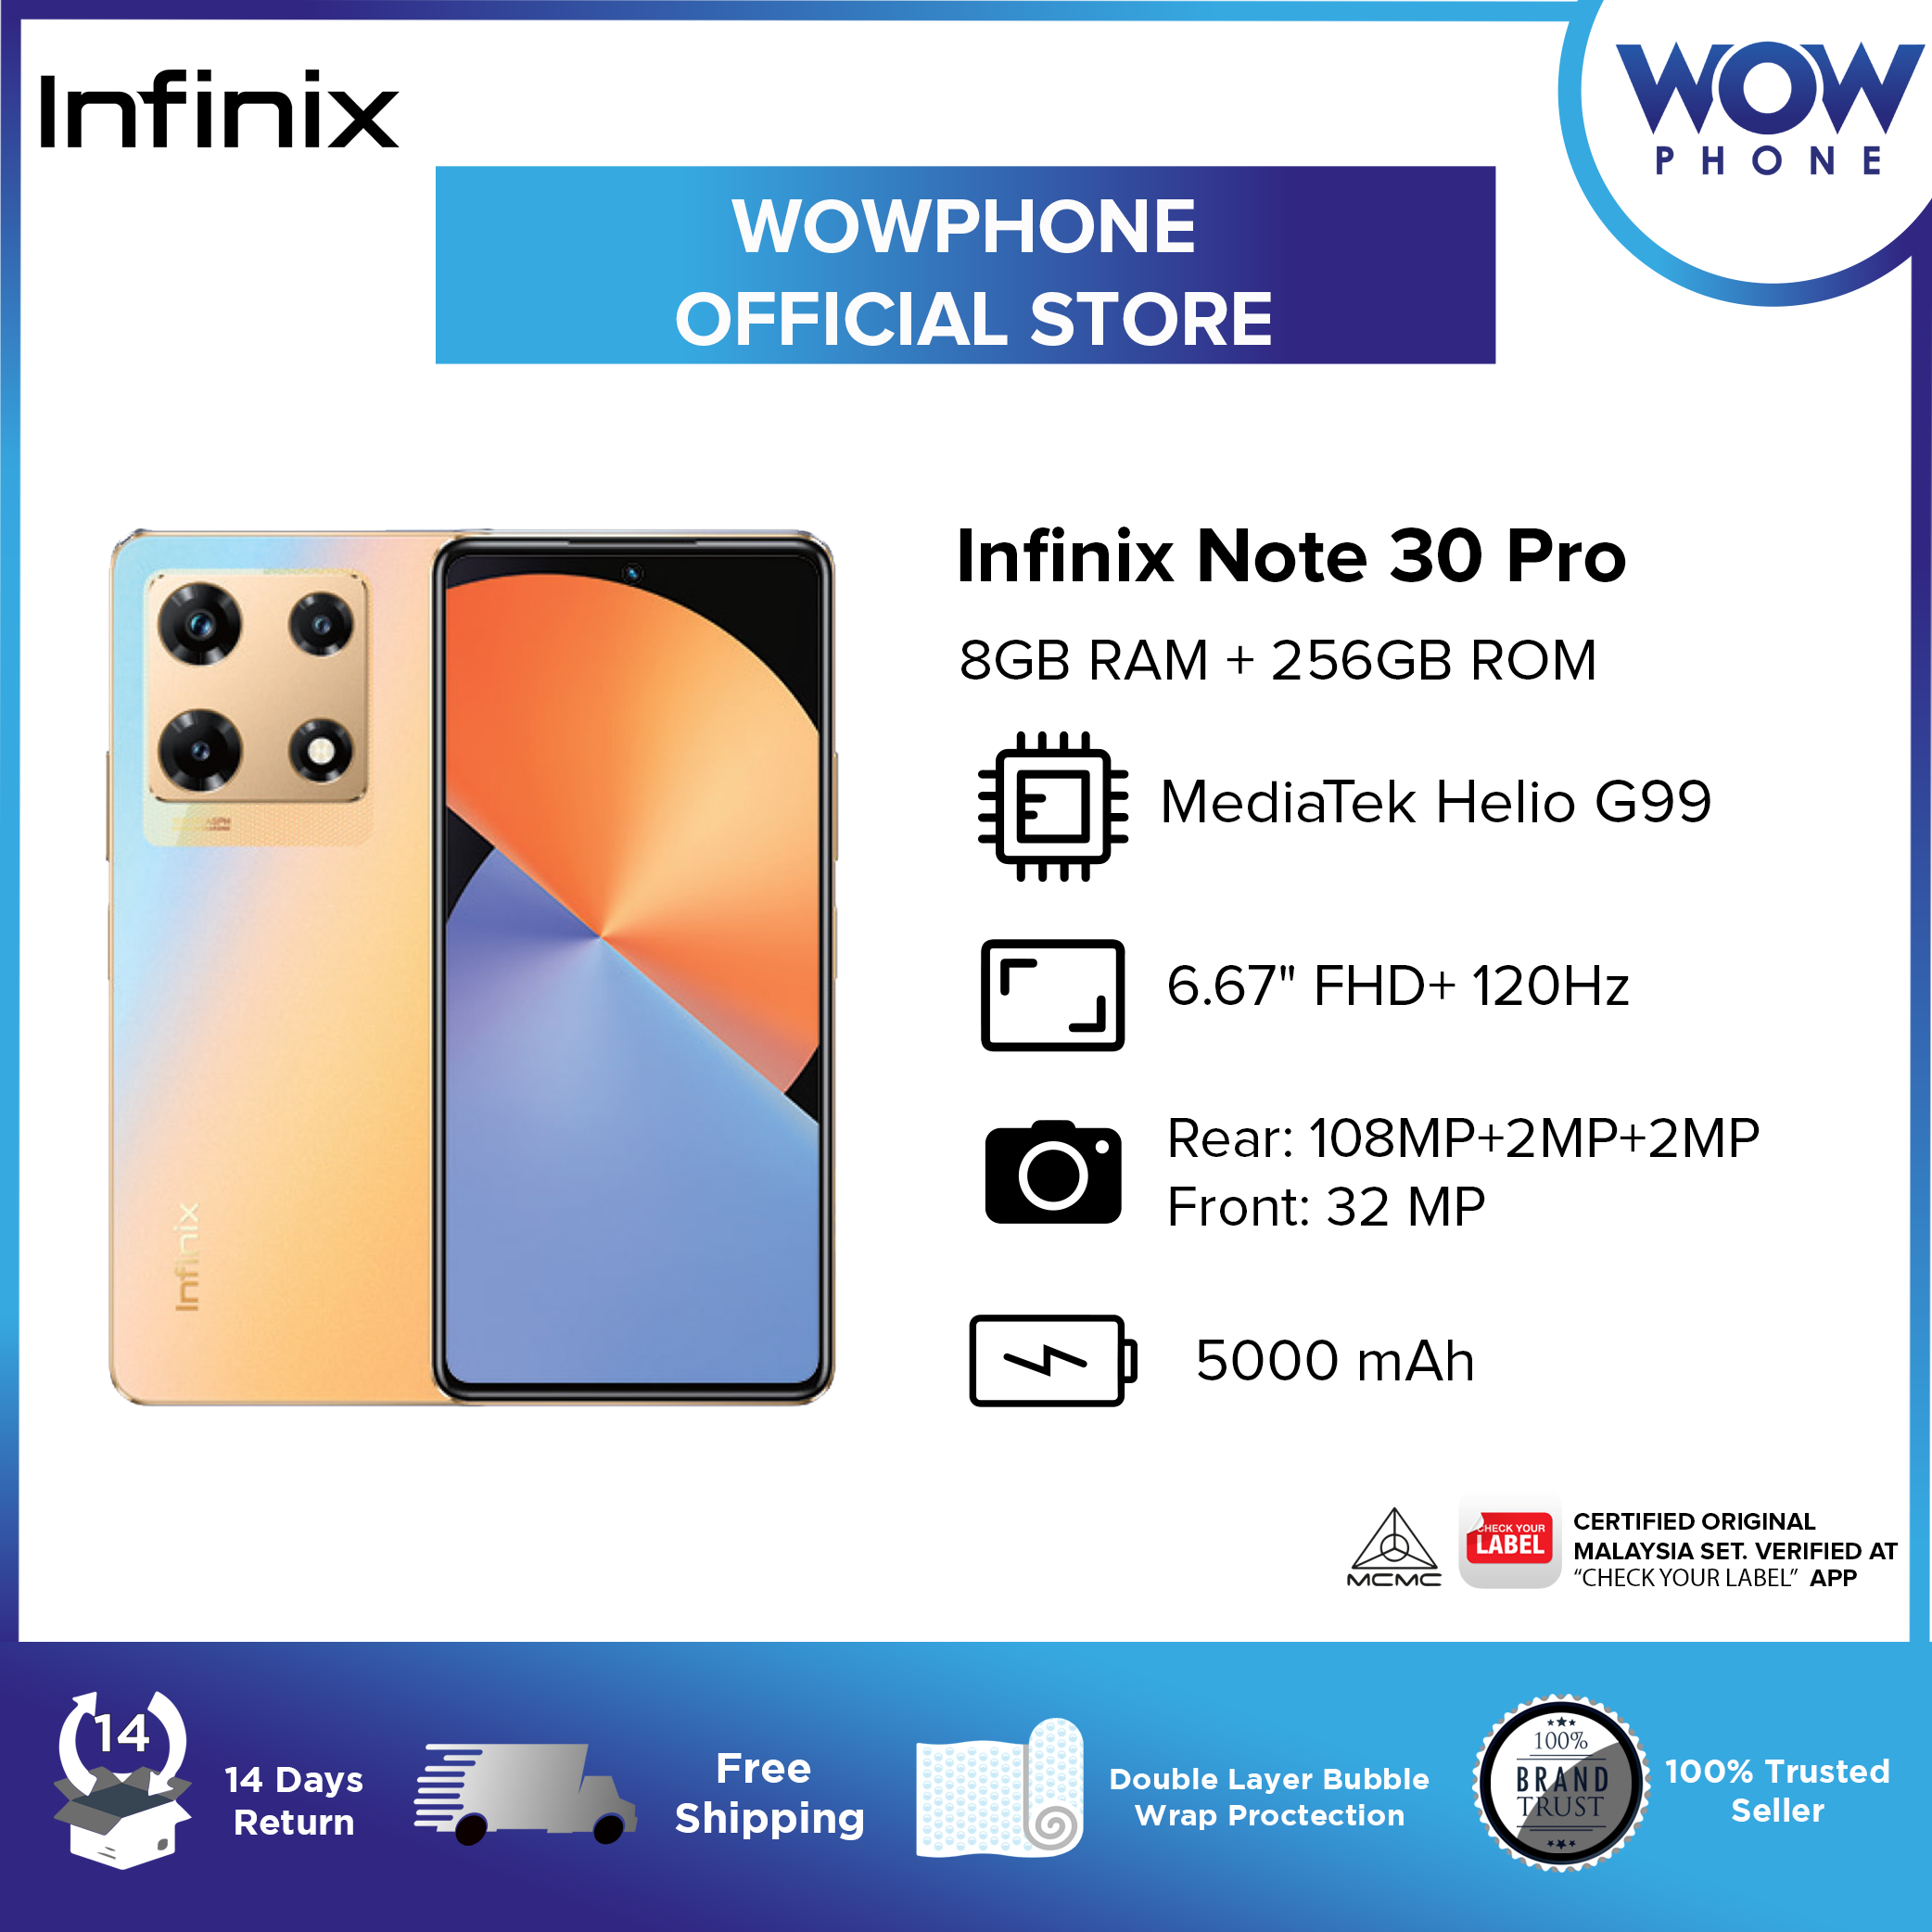 Infinix Note 30 Pro Price In Malaysia & Specs - KTS